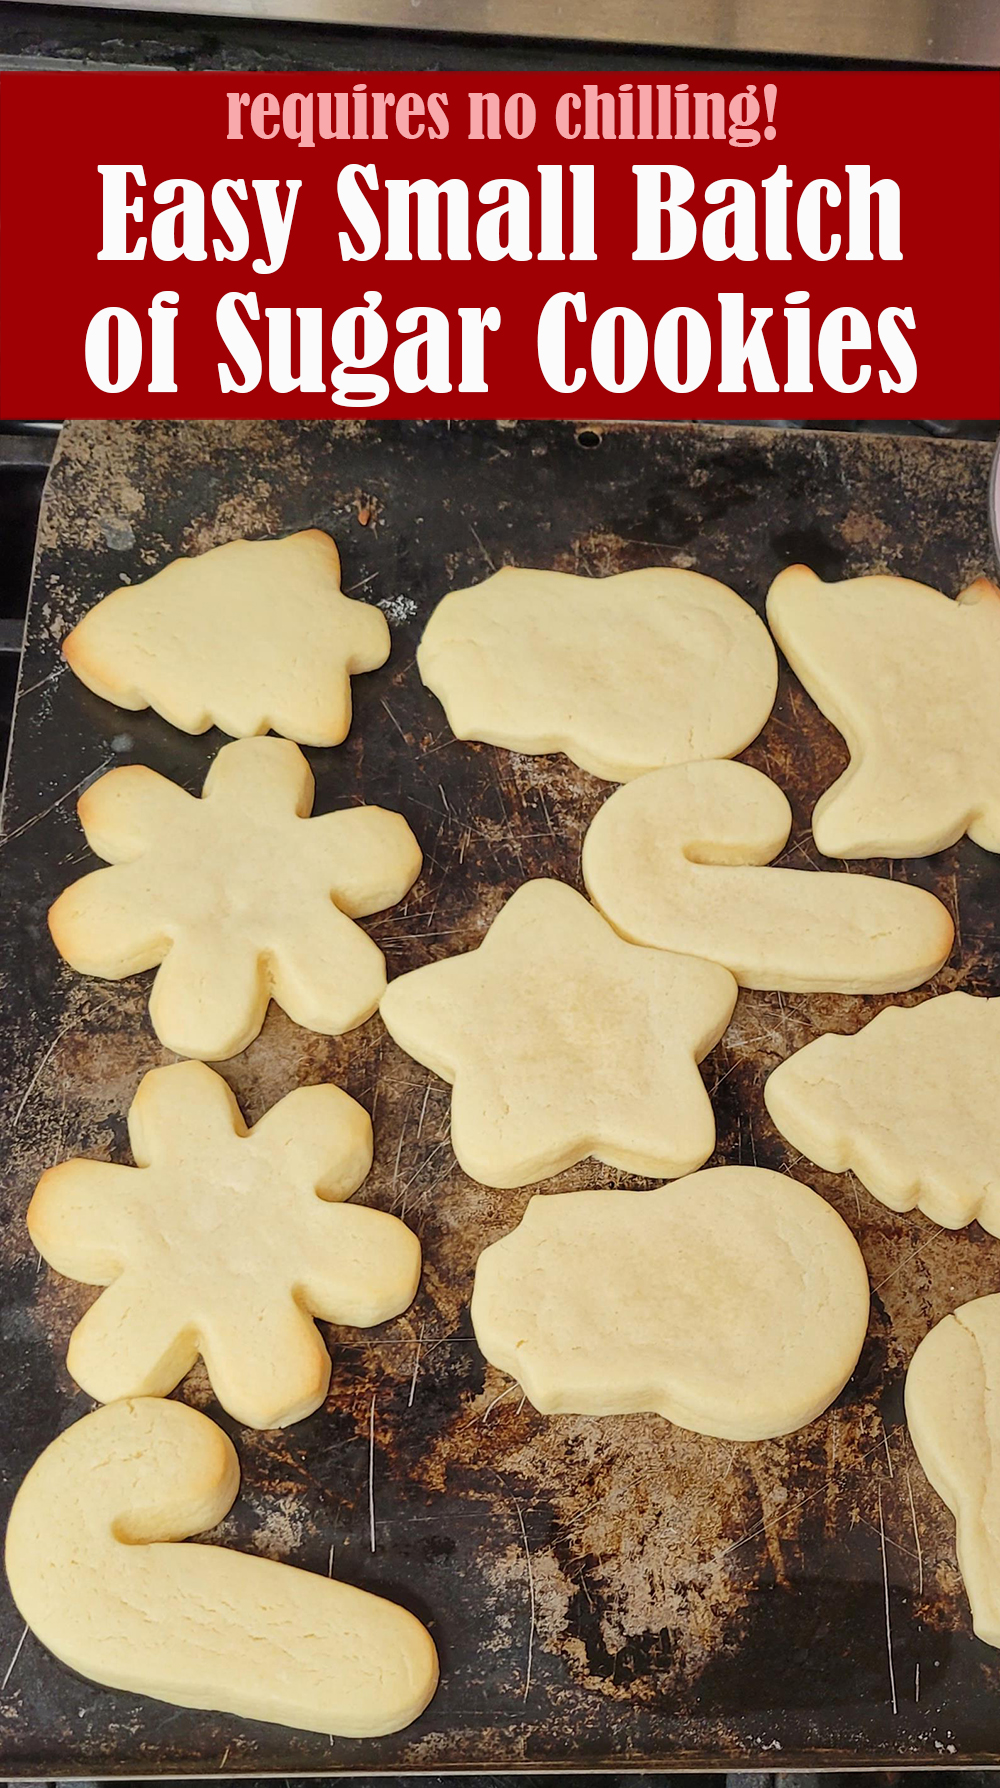 Easy Small Batch of Sugar Cookies